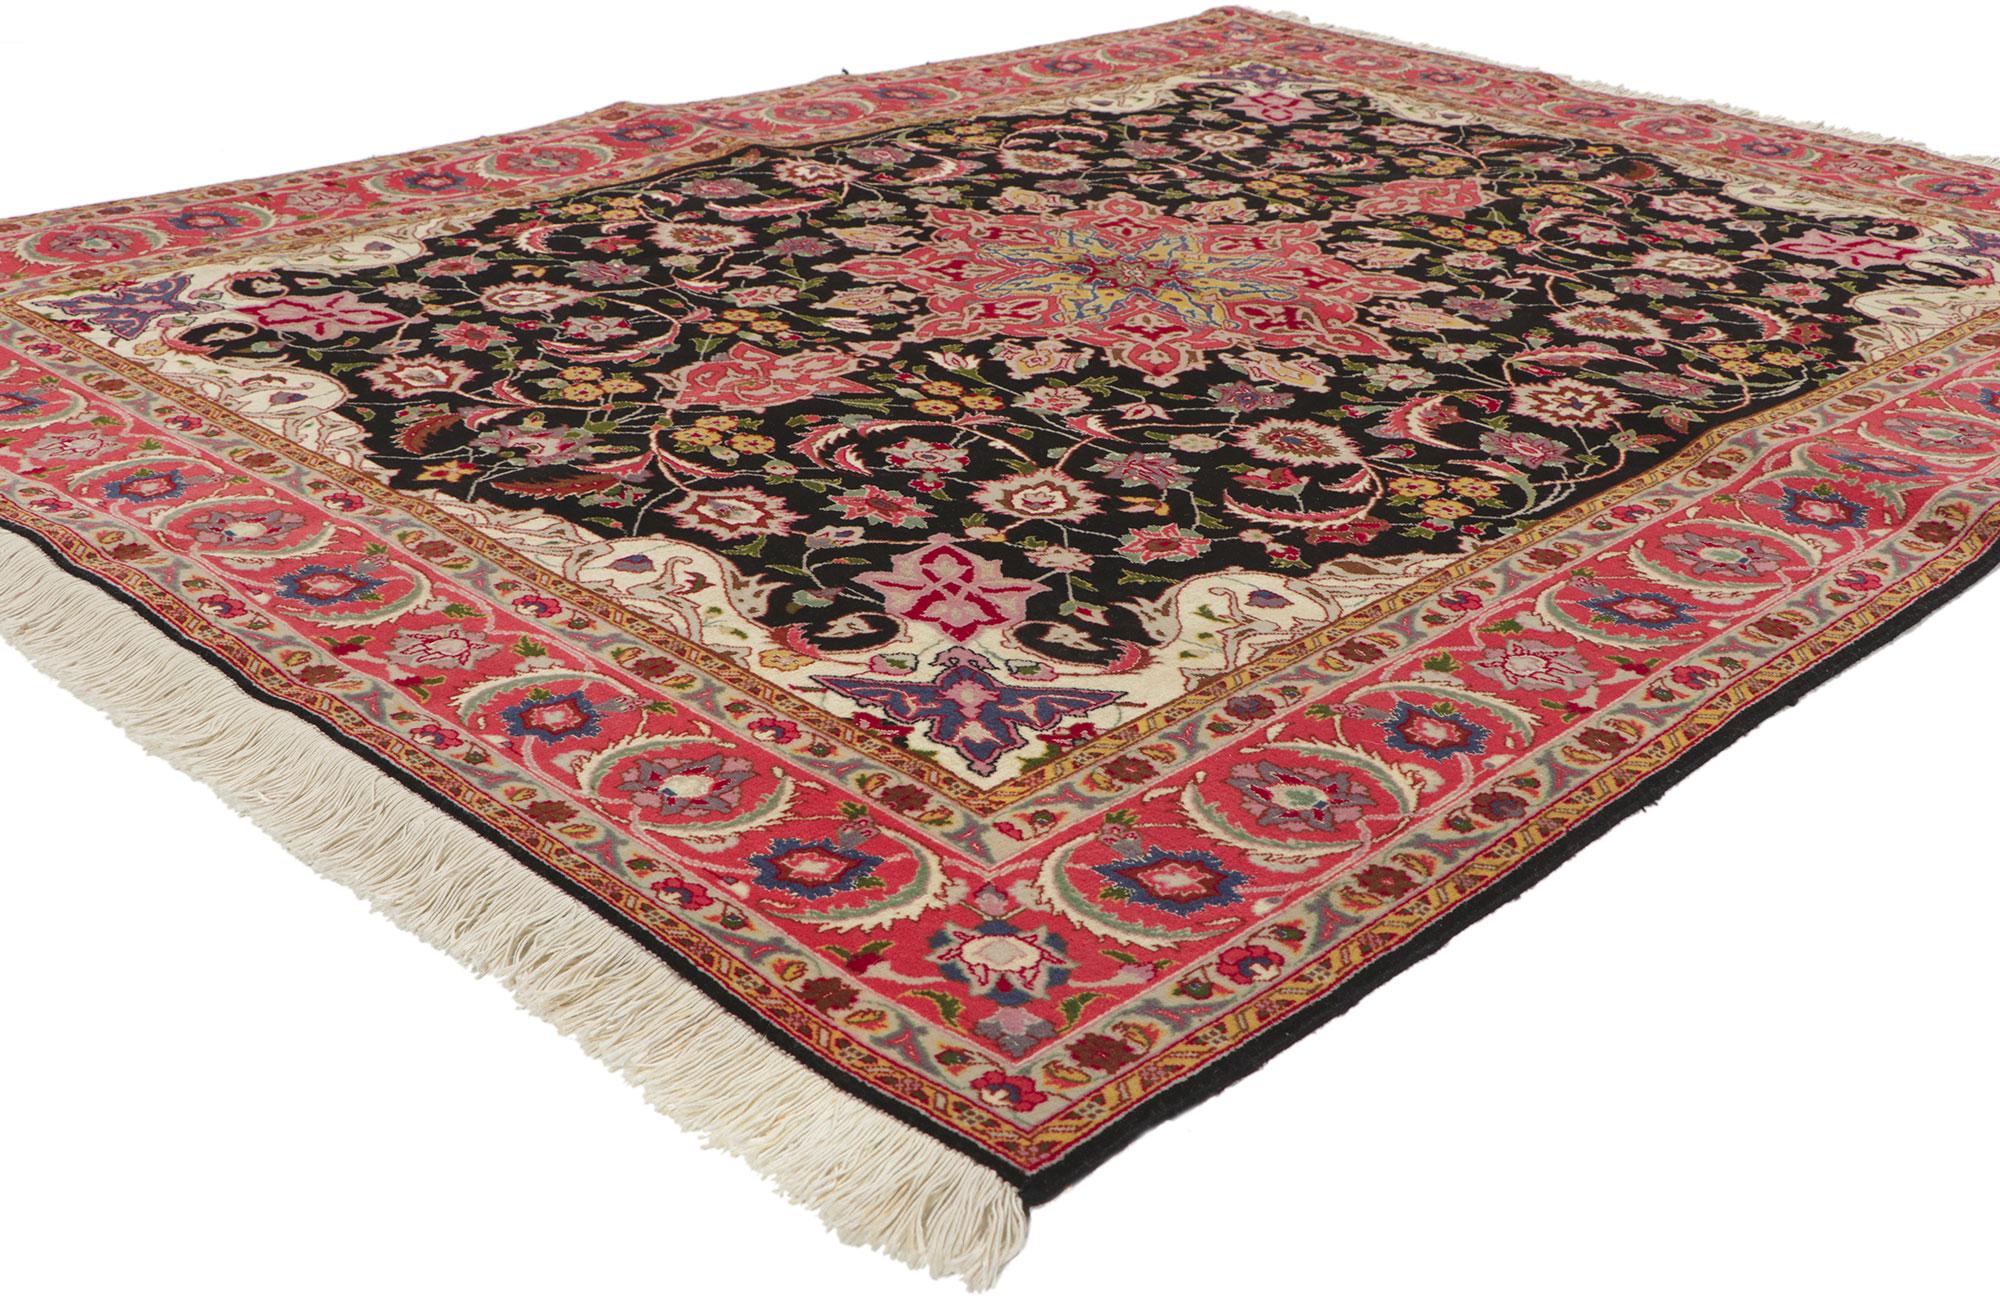 74837 Vintage Persian Tabriz Rug, 04'10 X 06'04.
Ornate details and effortless beauty with romantic connotations, this hand knotted wool vintage Persian Tabriz rug beautifully embodies both Art Nouveau and Rococo style. A round medallion anchored